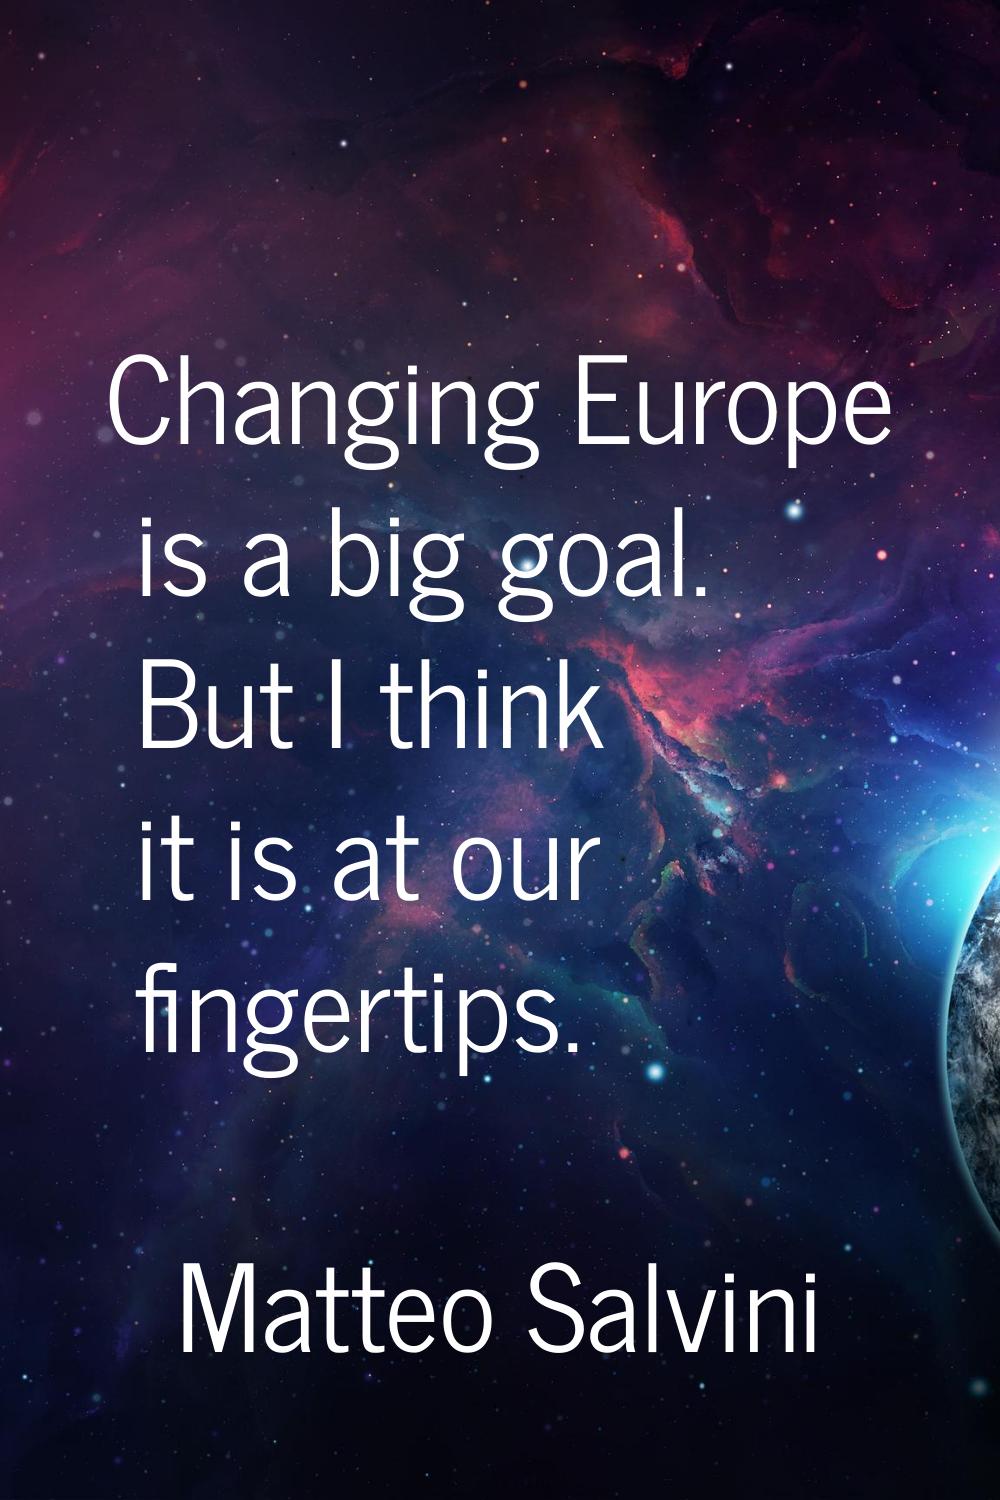 Changing Europe is a big goal. But I think it is at our fingertips.